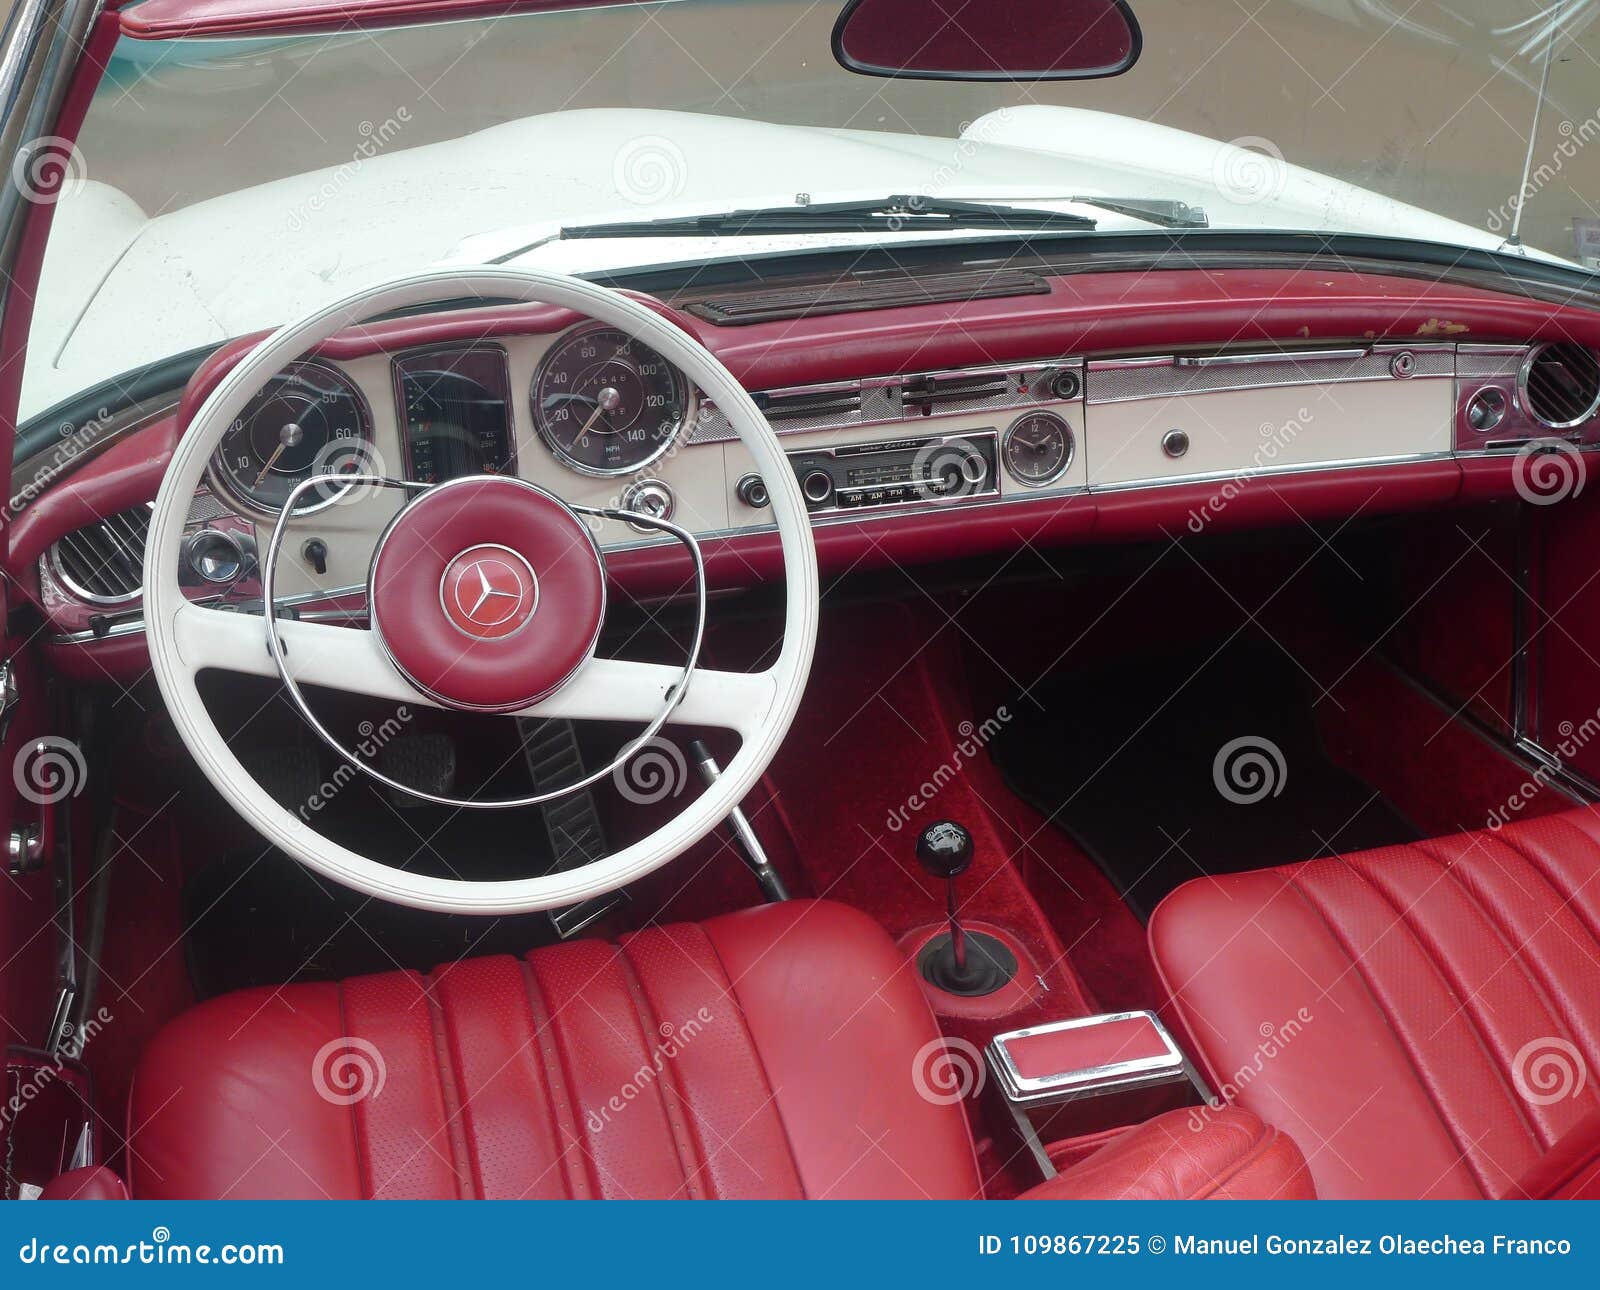 Mercedes Benz 230sl Interior Parked In Lima Editorial Image